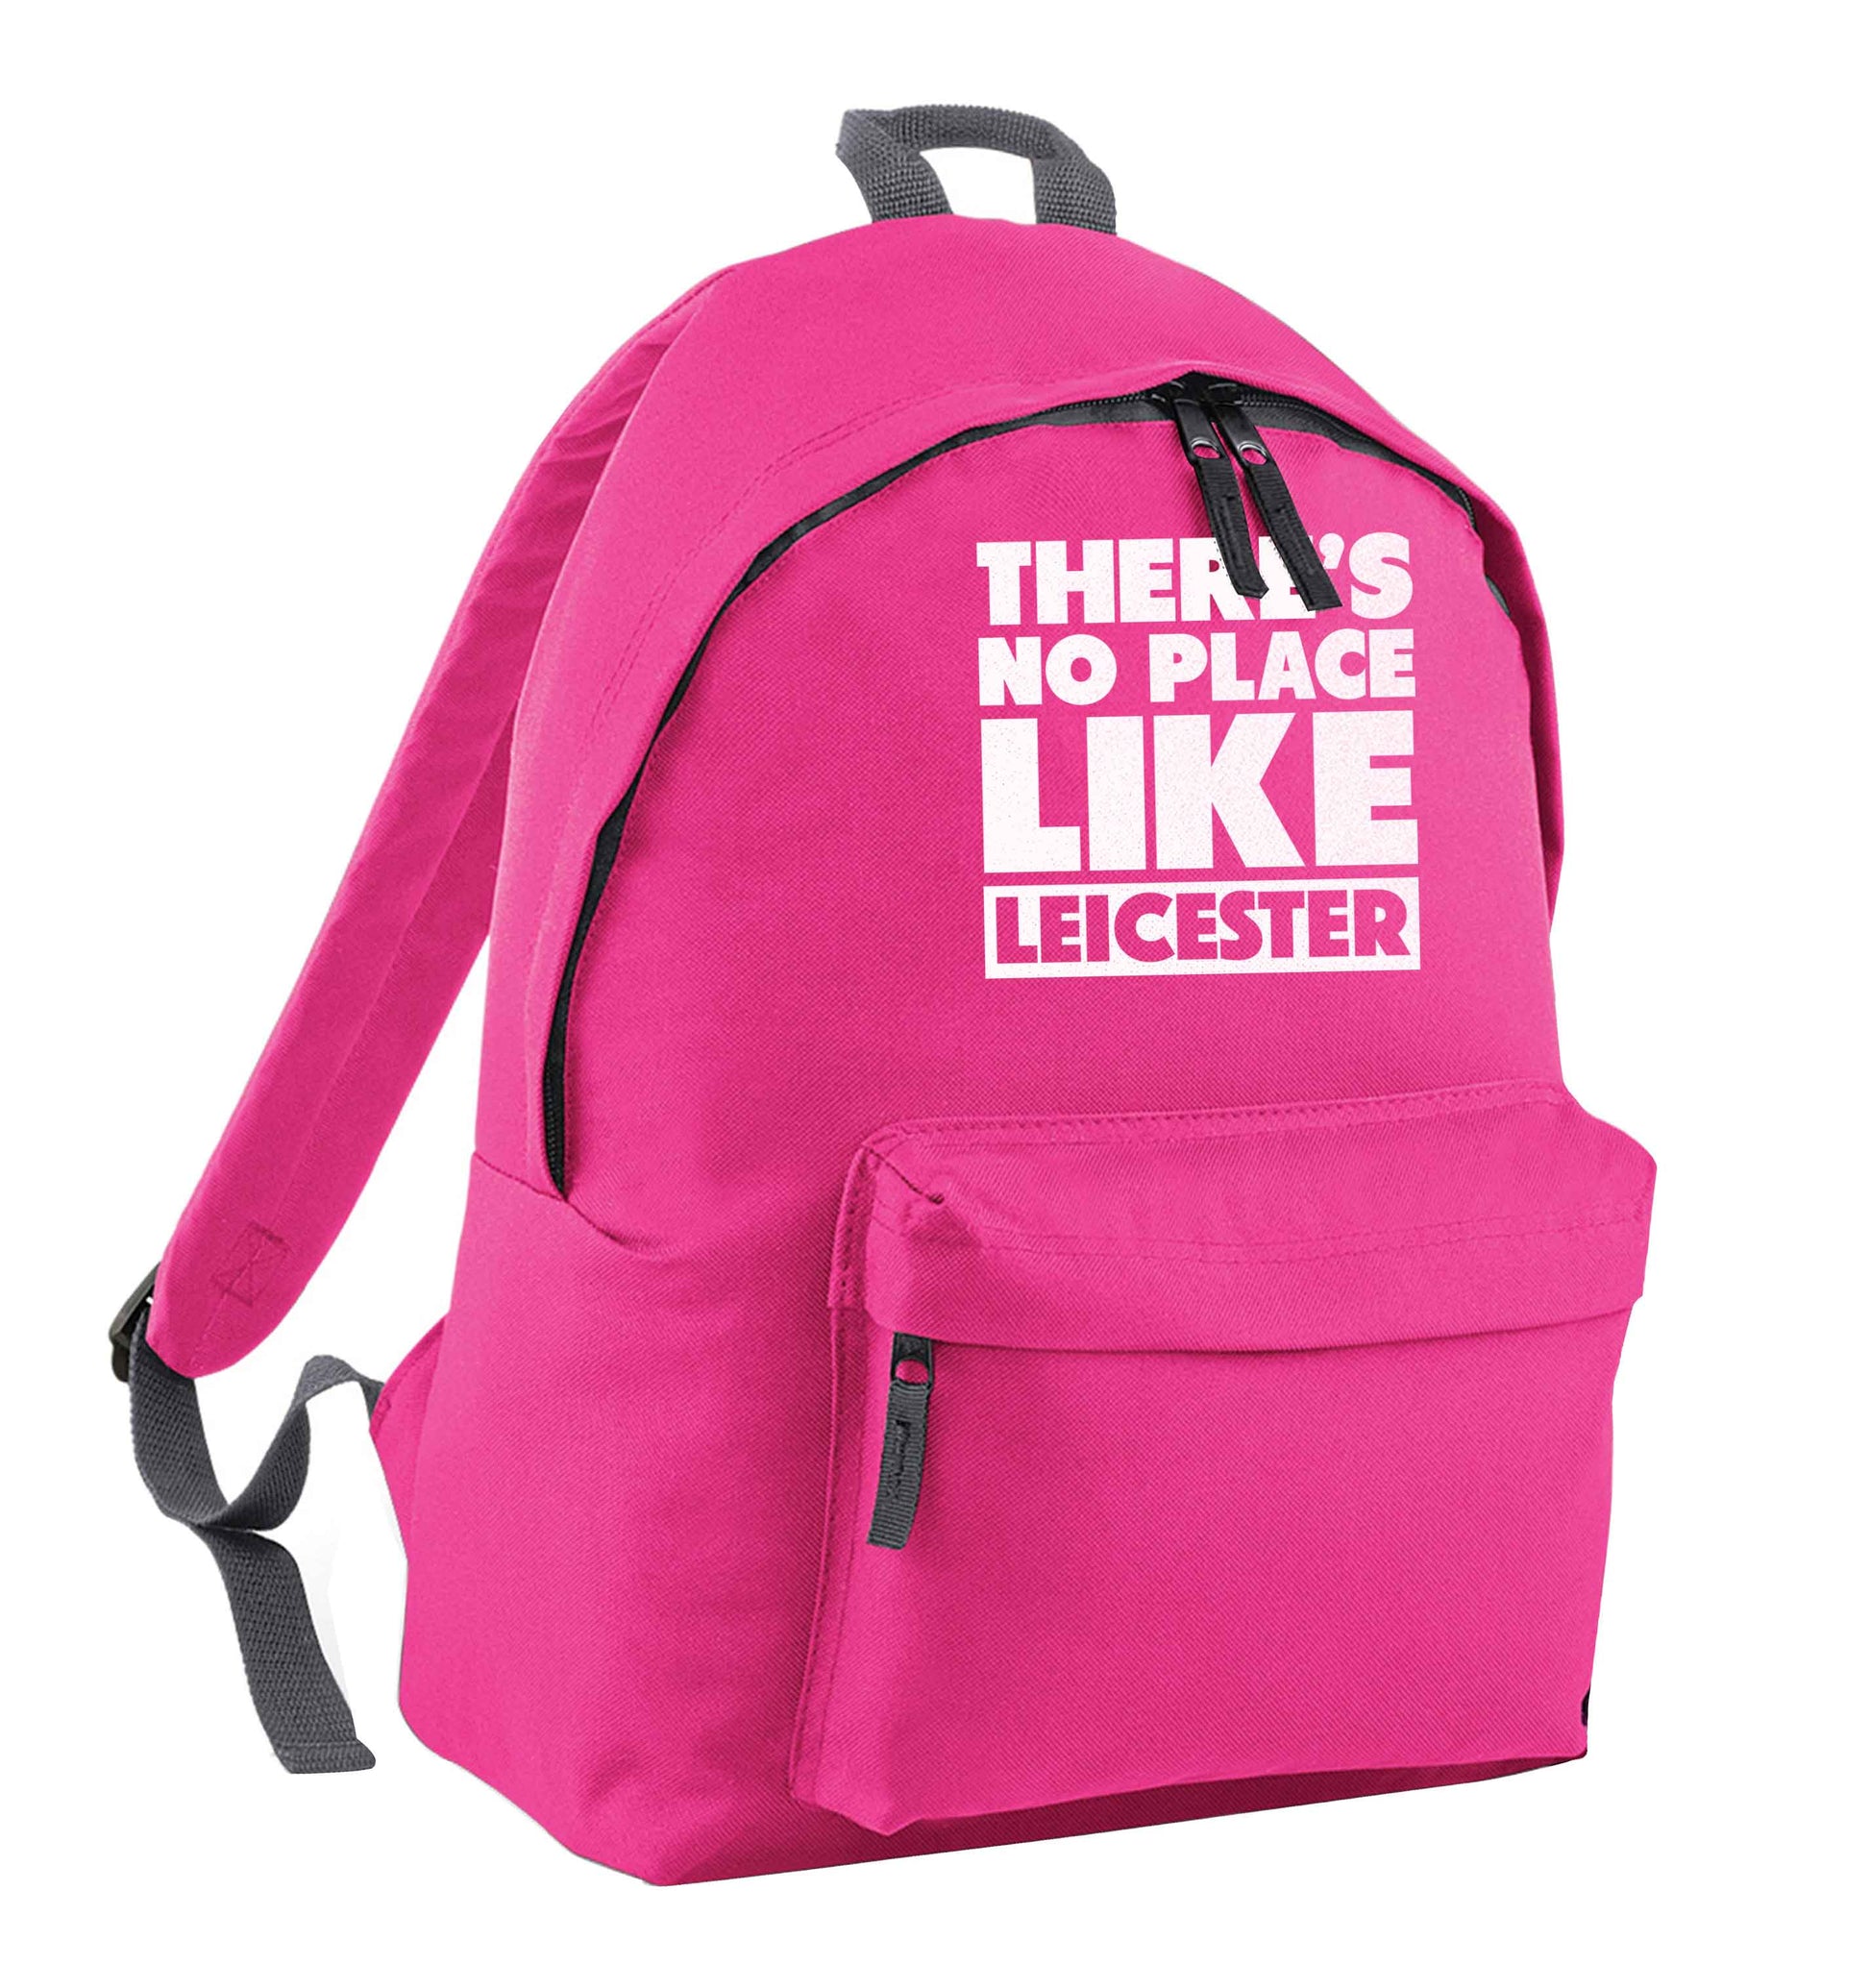 There's no place like Leicester pink children's backpack